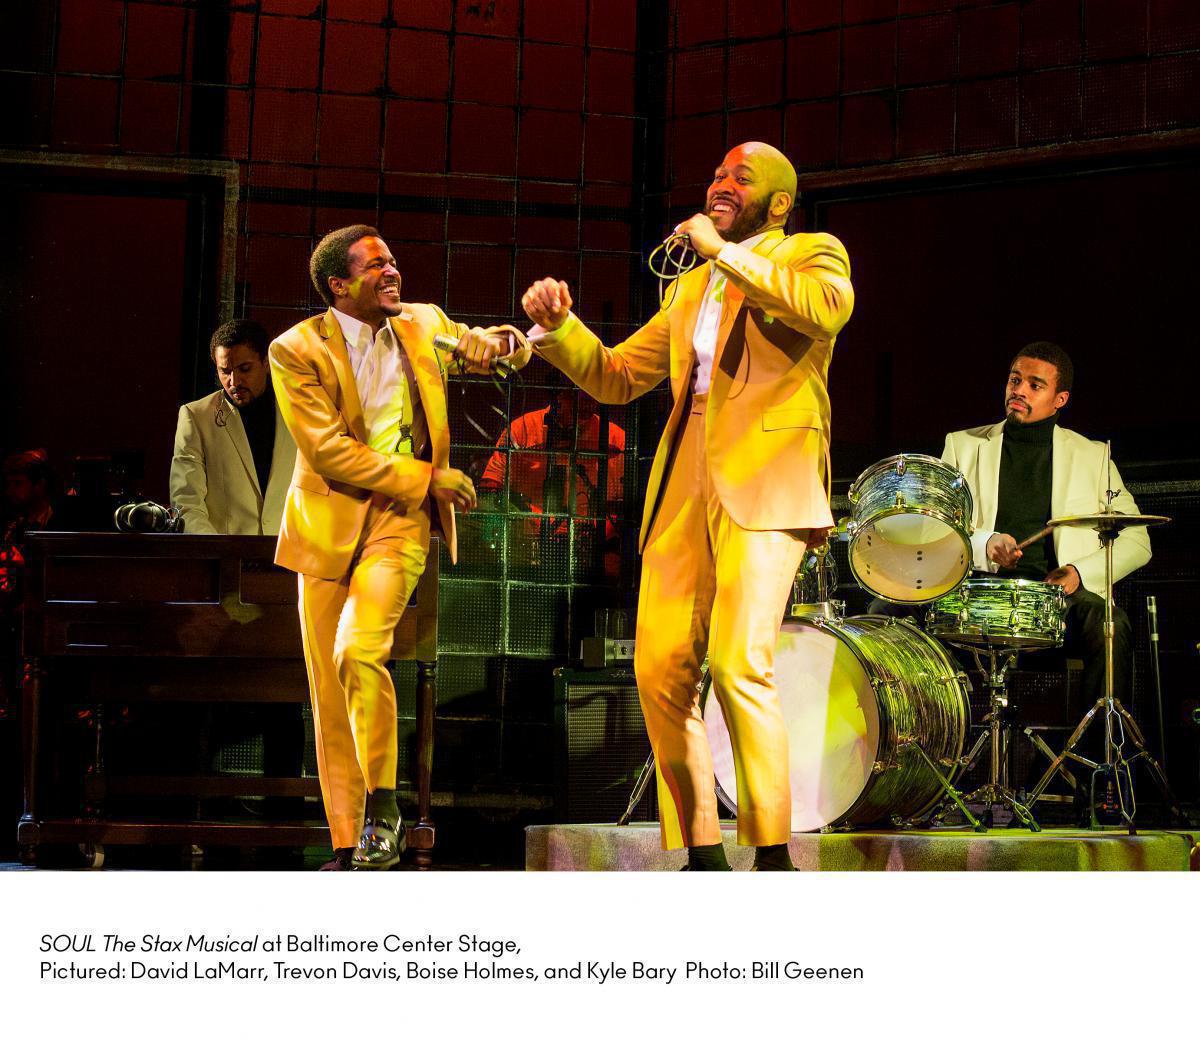 Photo 4 in 'SOUL -  The STAX Musical' gallery showcasing lighting design by Mike Baldassari of Mike-O-Matic Industries LLC